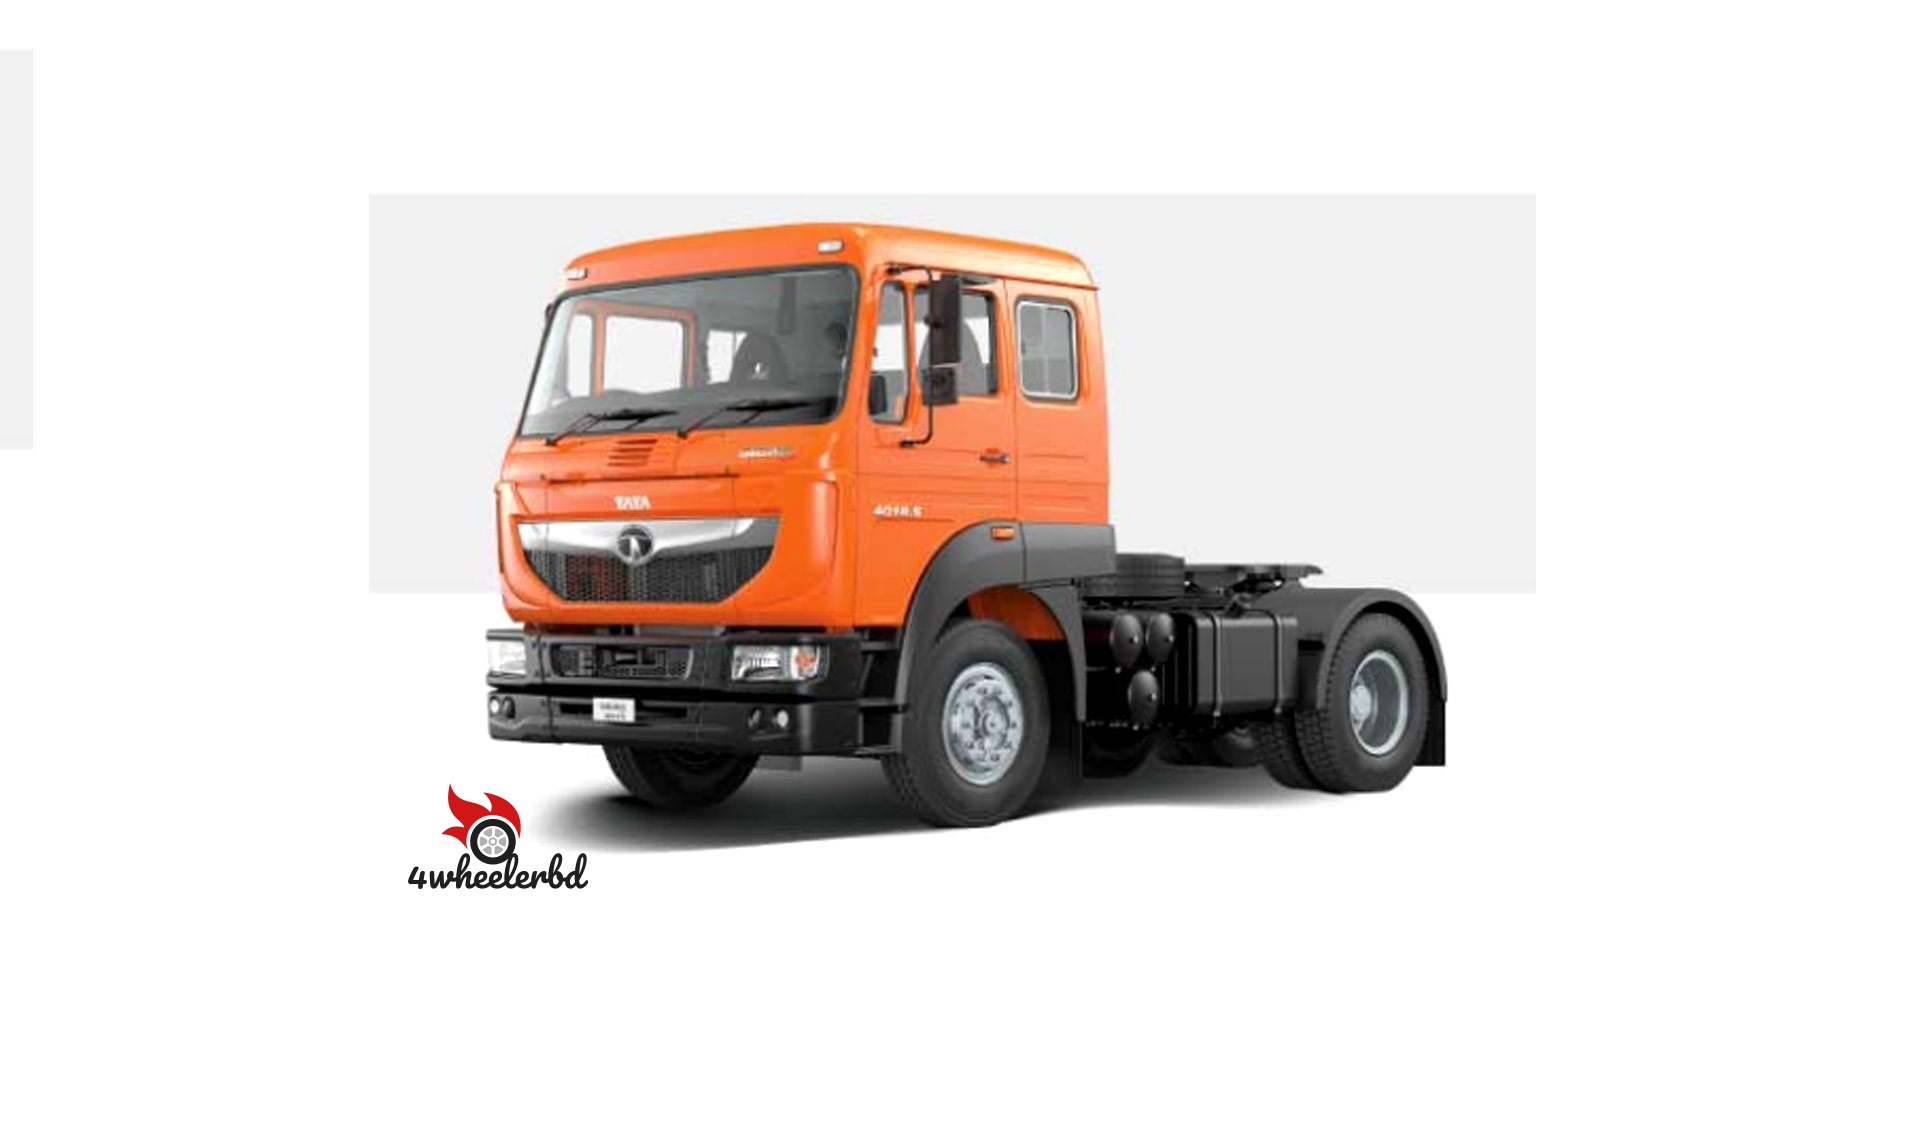 TATA Signa 4018.S: Price in Bangladesh 2022, Specifications